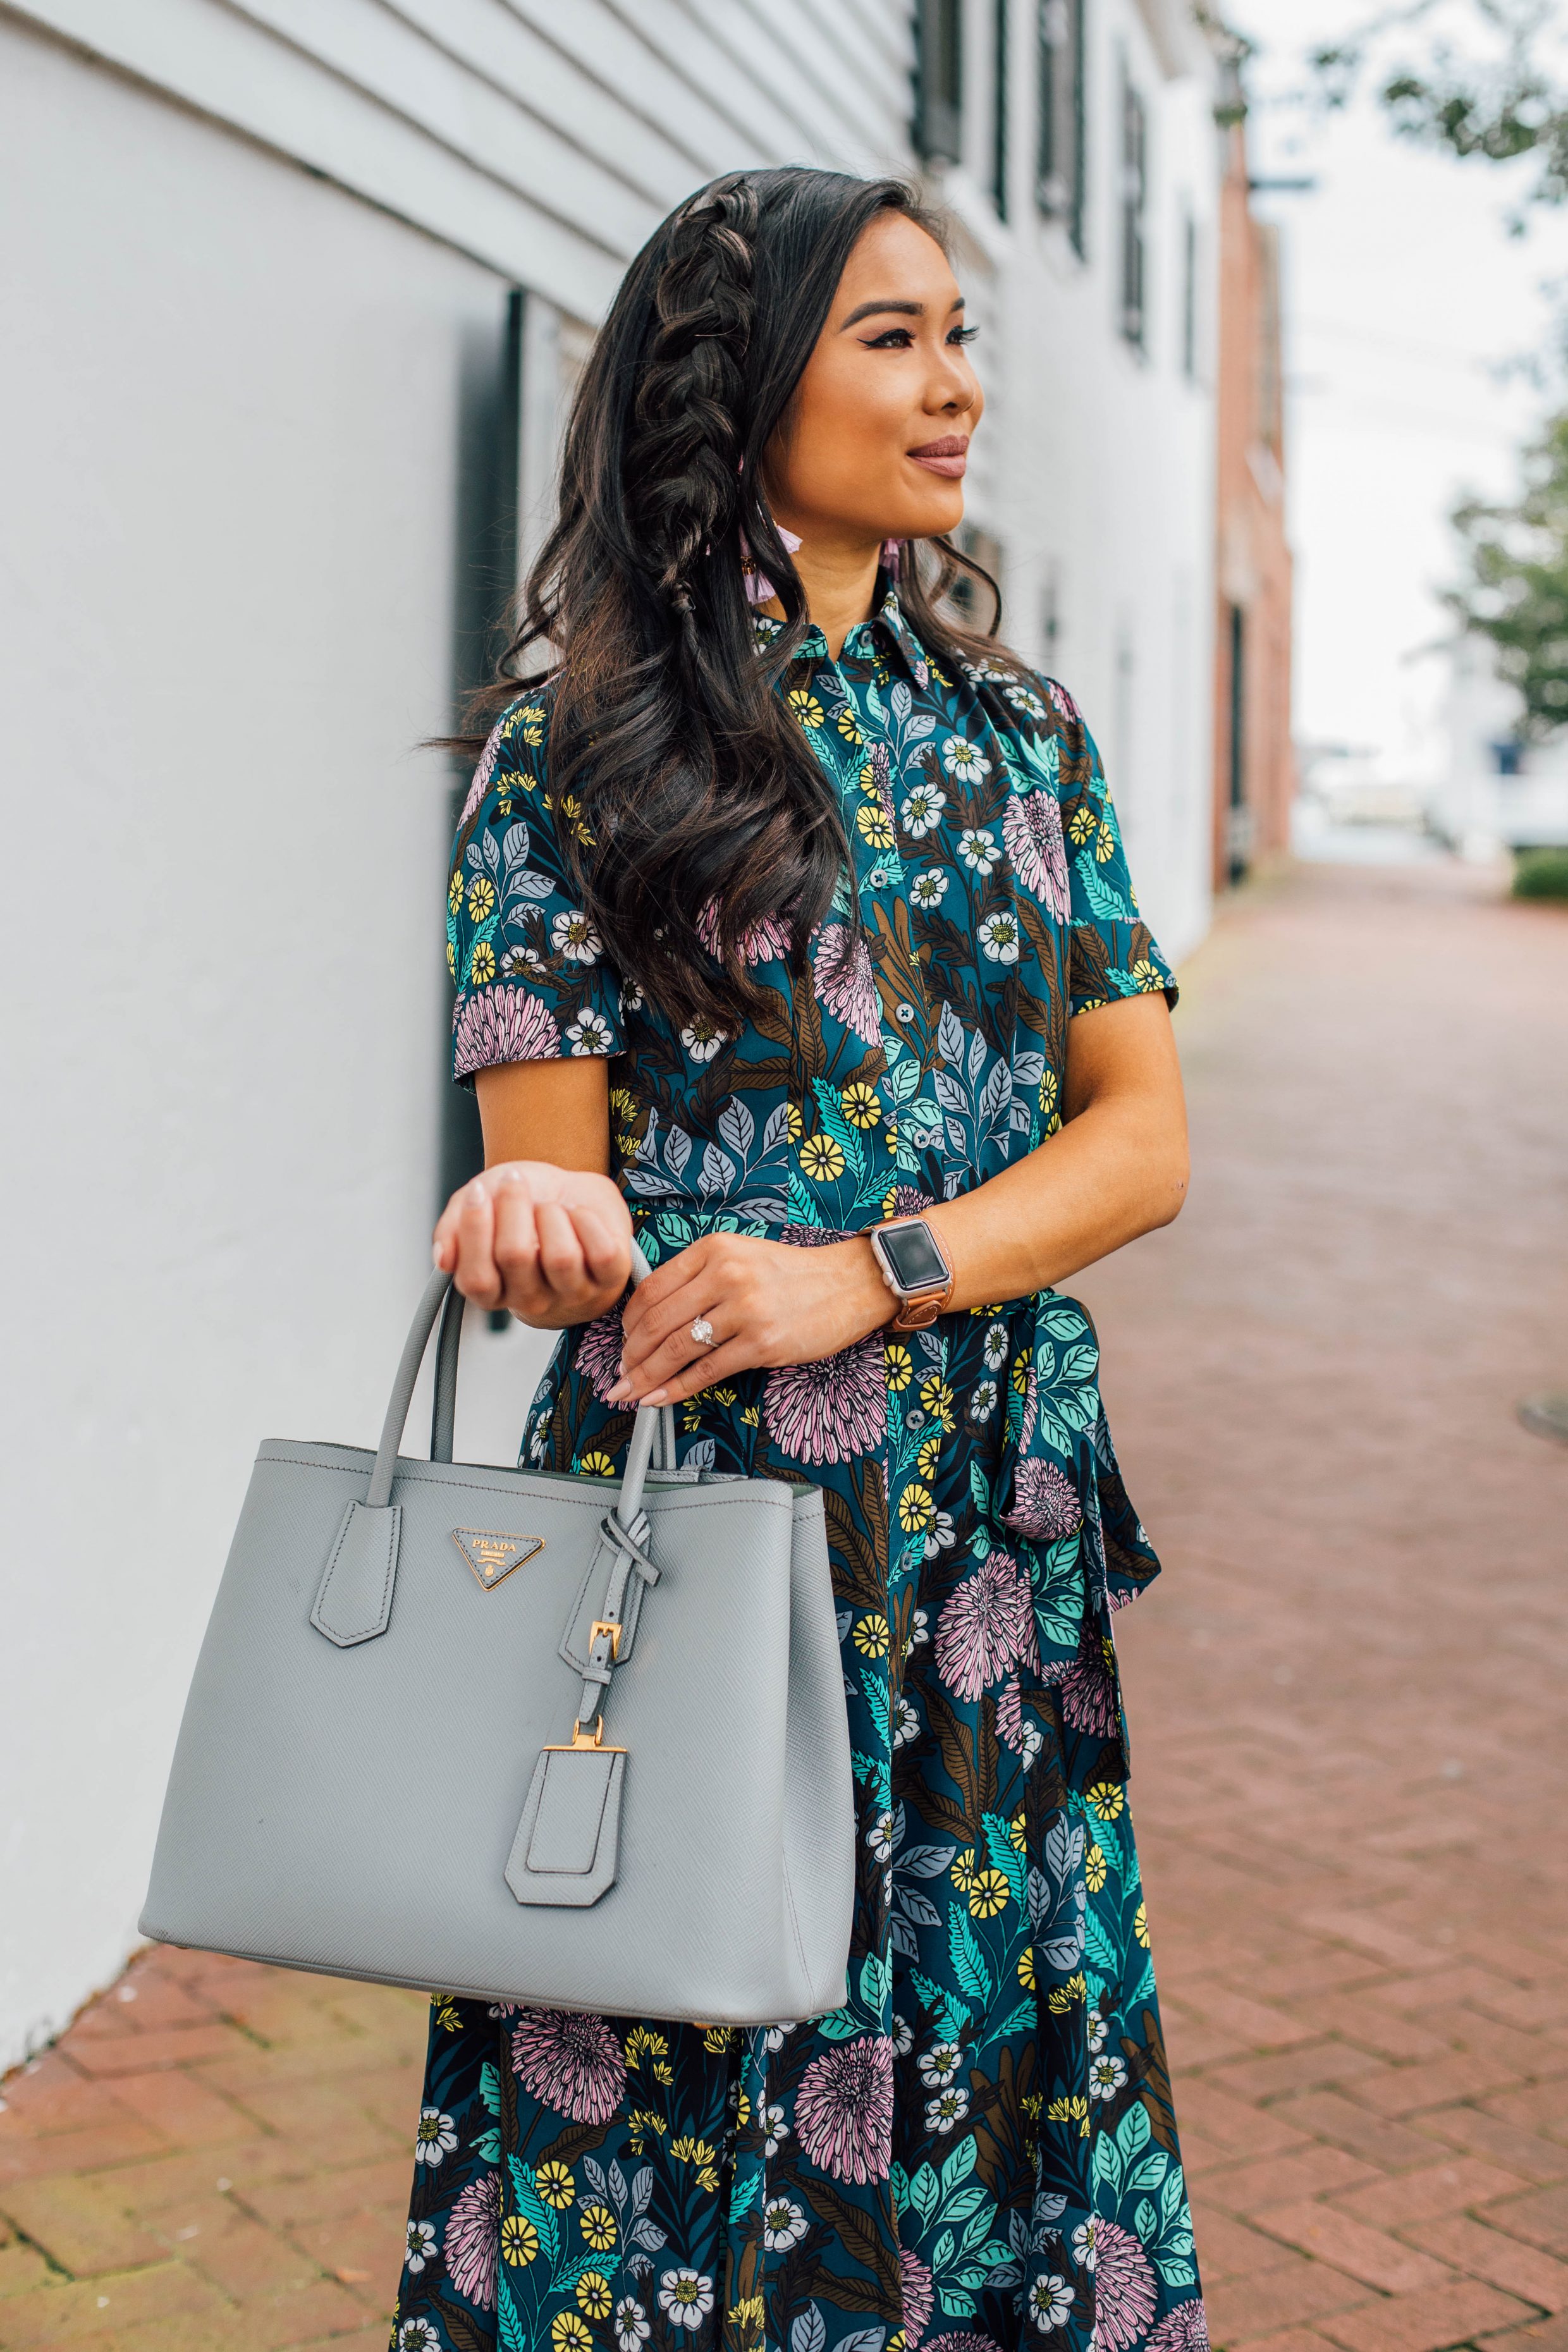 Blogger Hoang-Kim wears a floral transition dress for summer into fall with a loose braid hairstyle